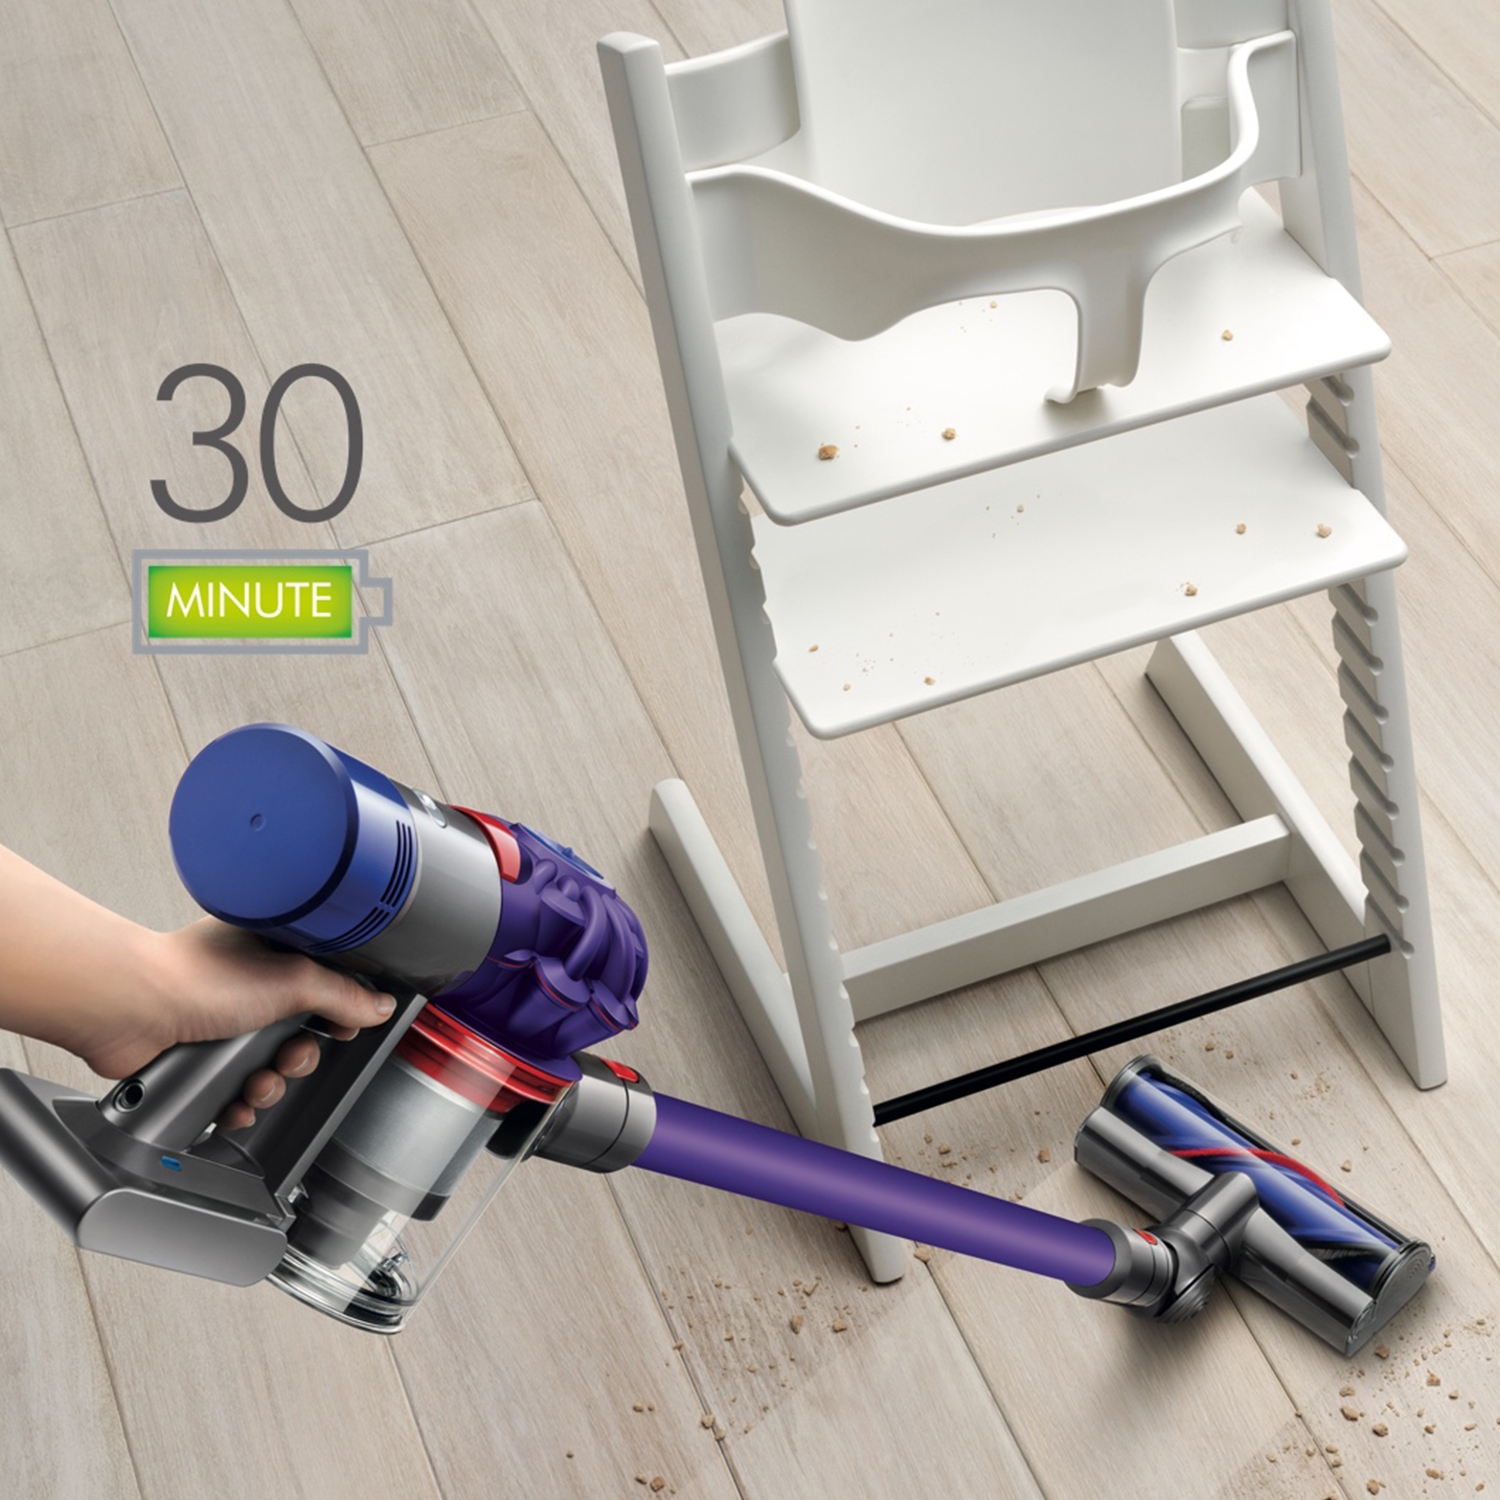 Dyson V7ANIMALEXTRA Cordless Vacuum Cleaner - 30 Minute Run Time - 2